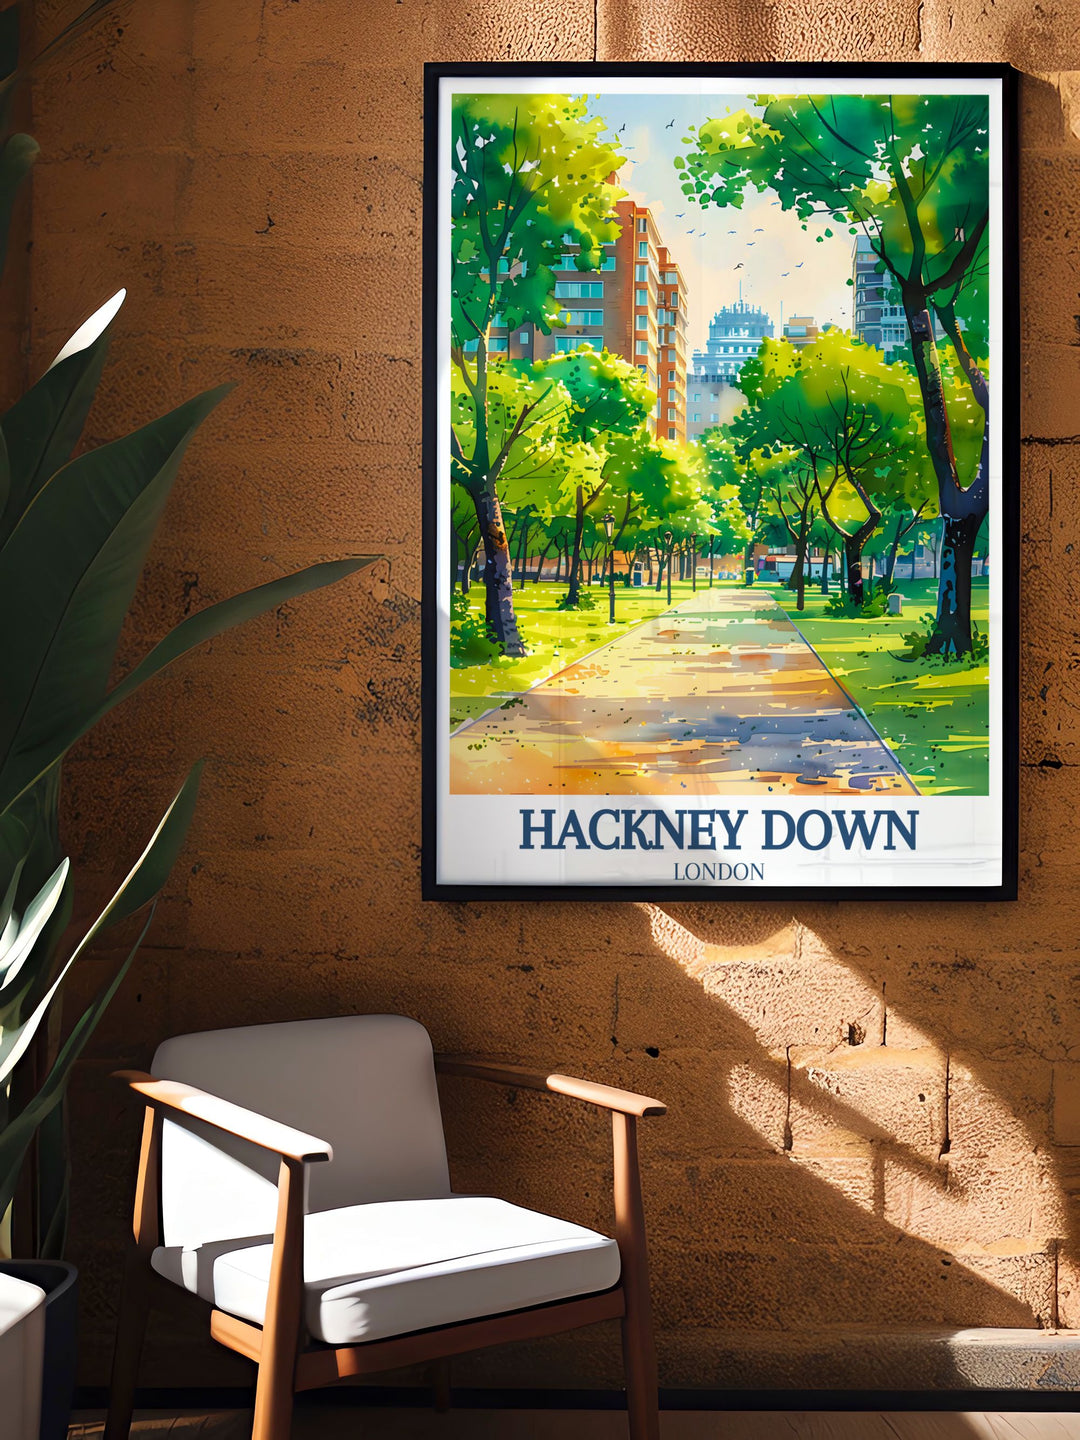 An intricate depiction of Hackney Downs Park, this art print showcases the peaceful walking paths and lush greenery of one of Londons beloved parks, bringing the charm of East London into your living space.